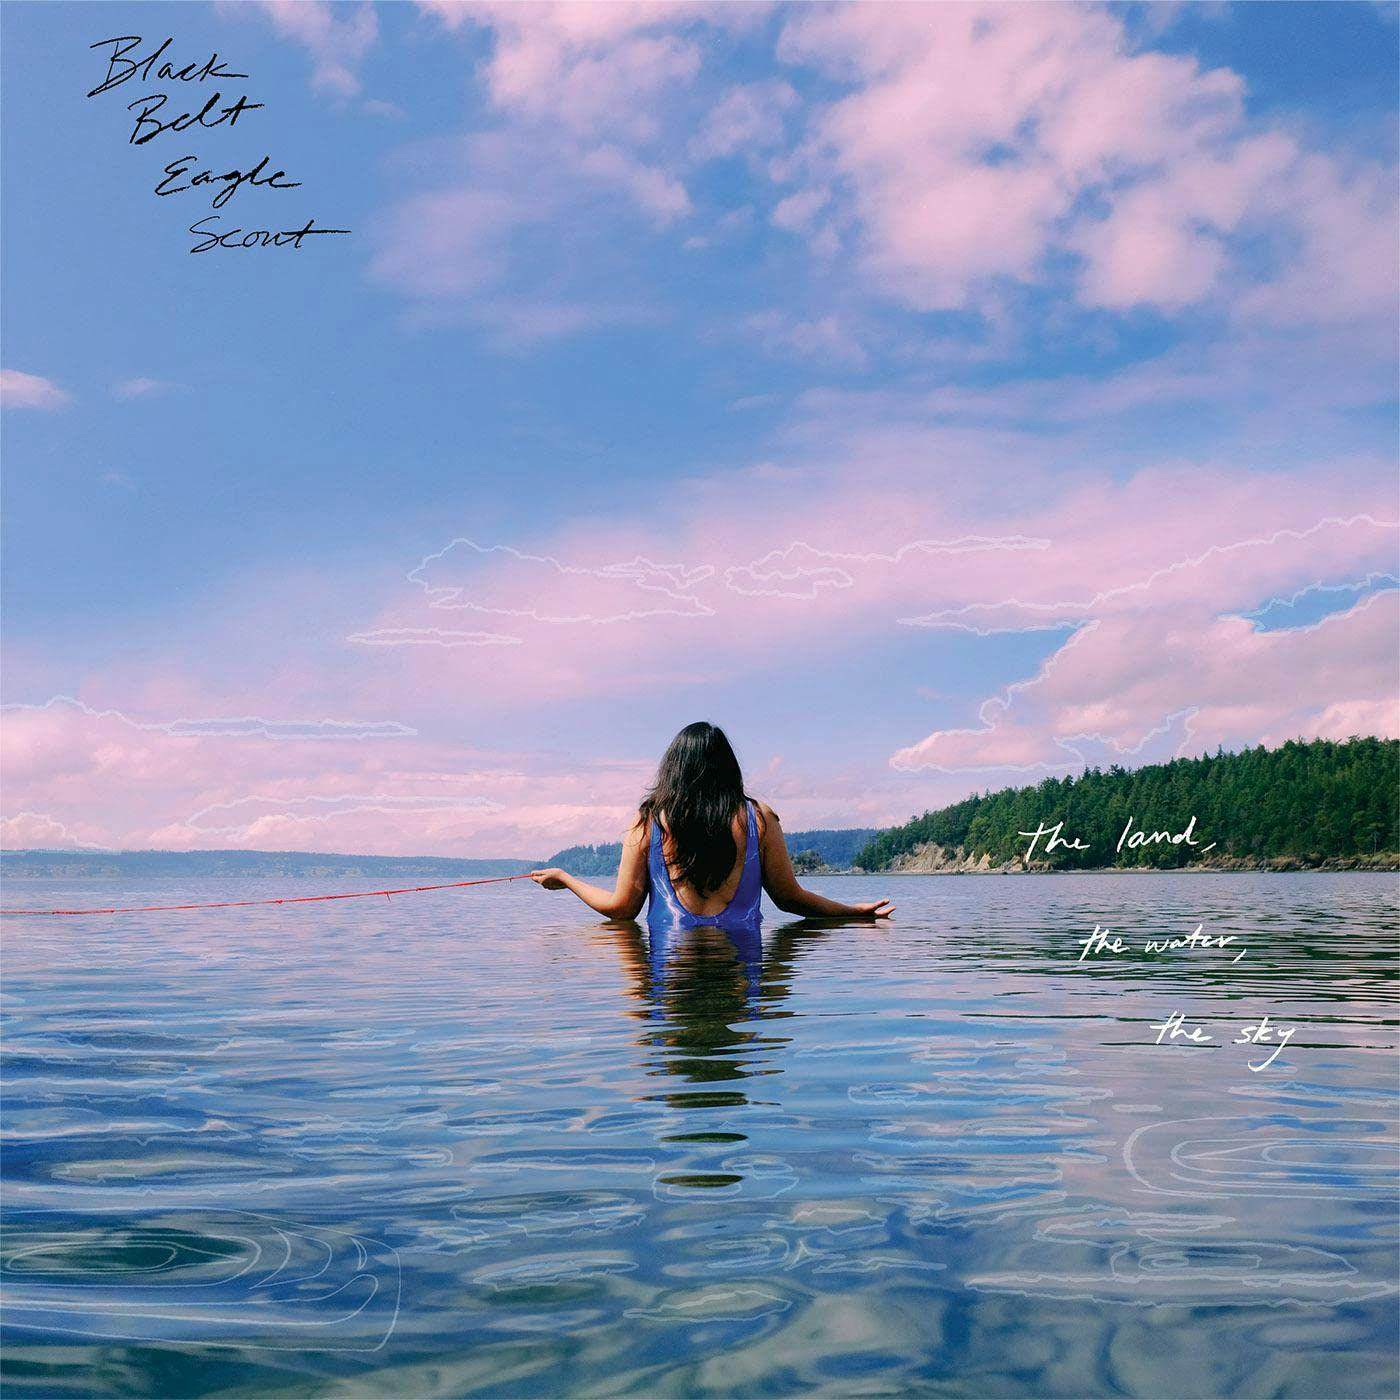 Black Belt Eagle Scout Land, The Water, The Sky Vinyl Record